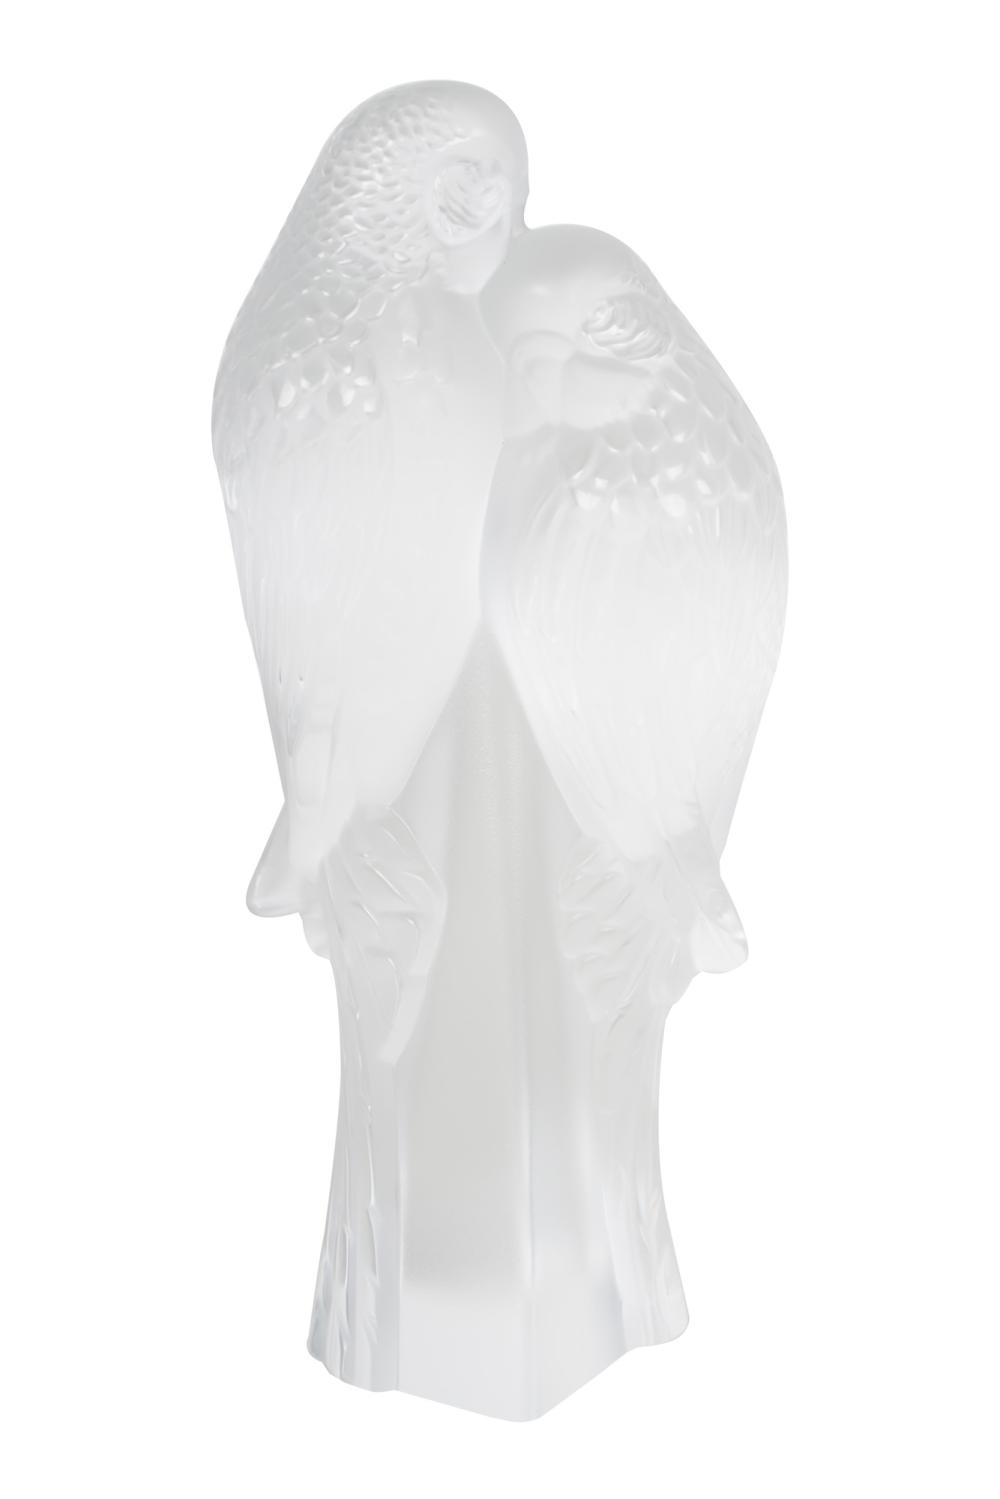 LALIQUE PARAKEET GROUP7 1/2 inches